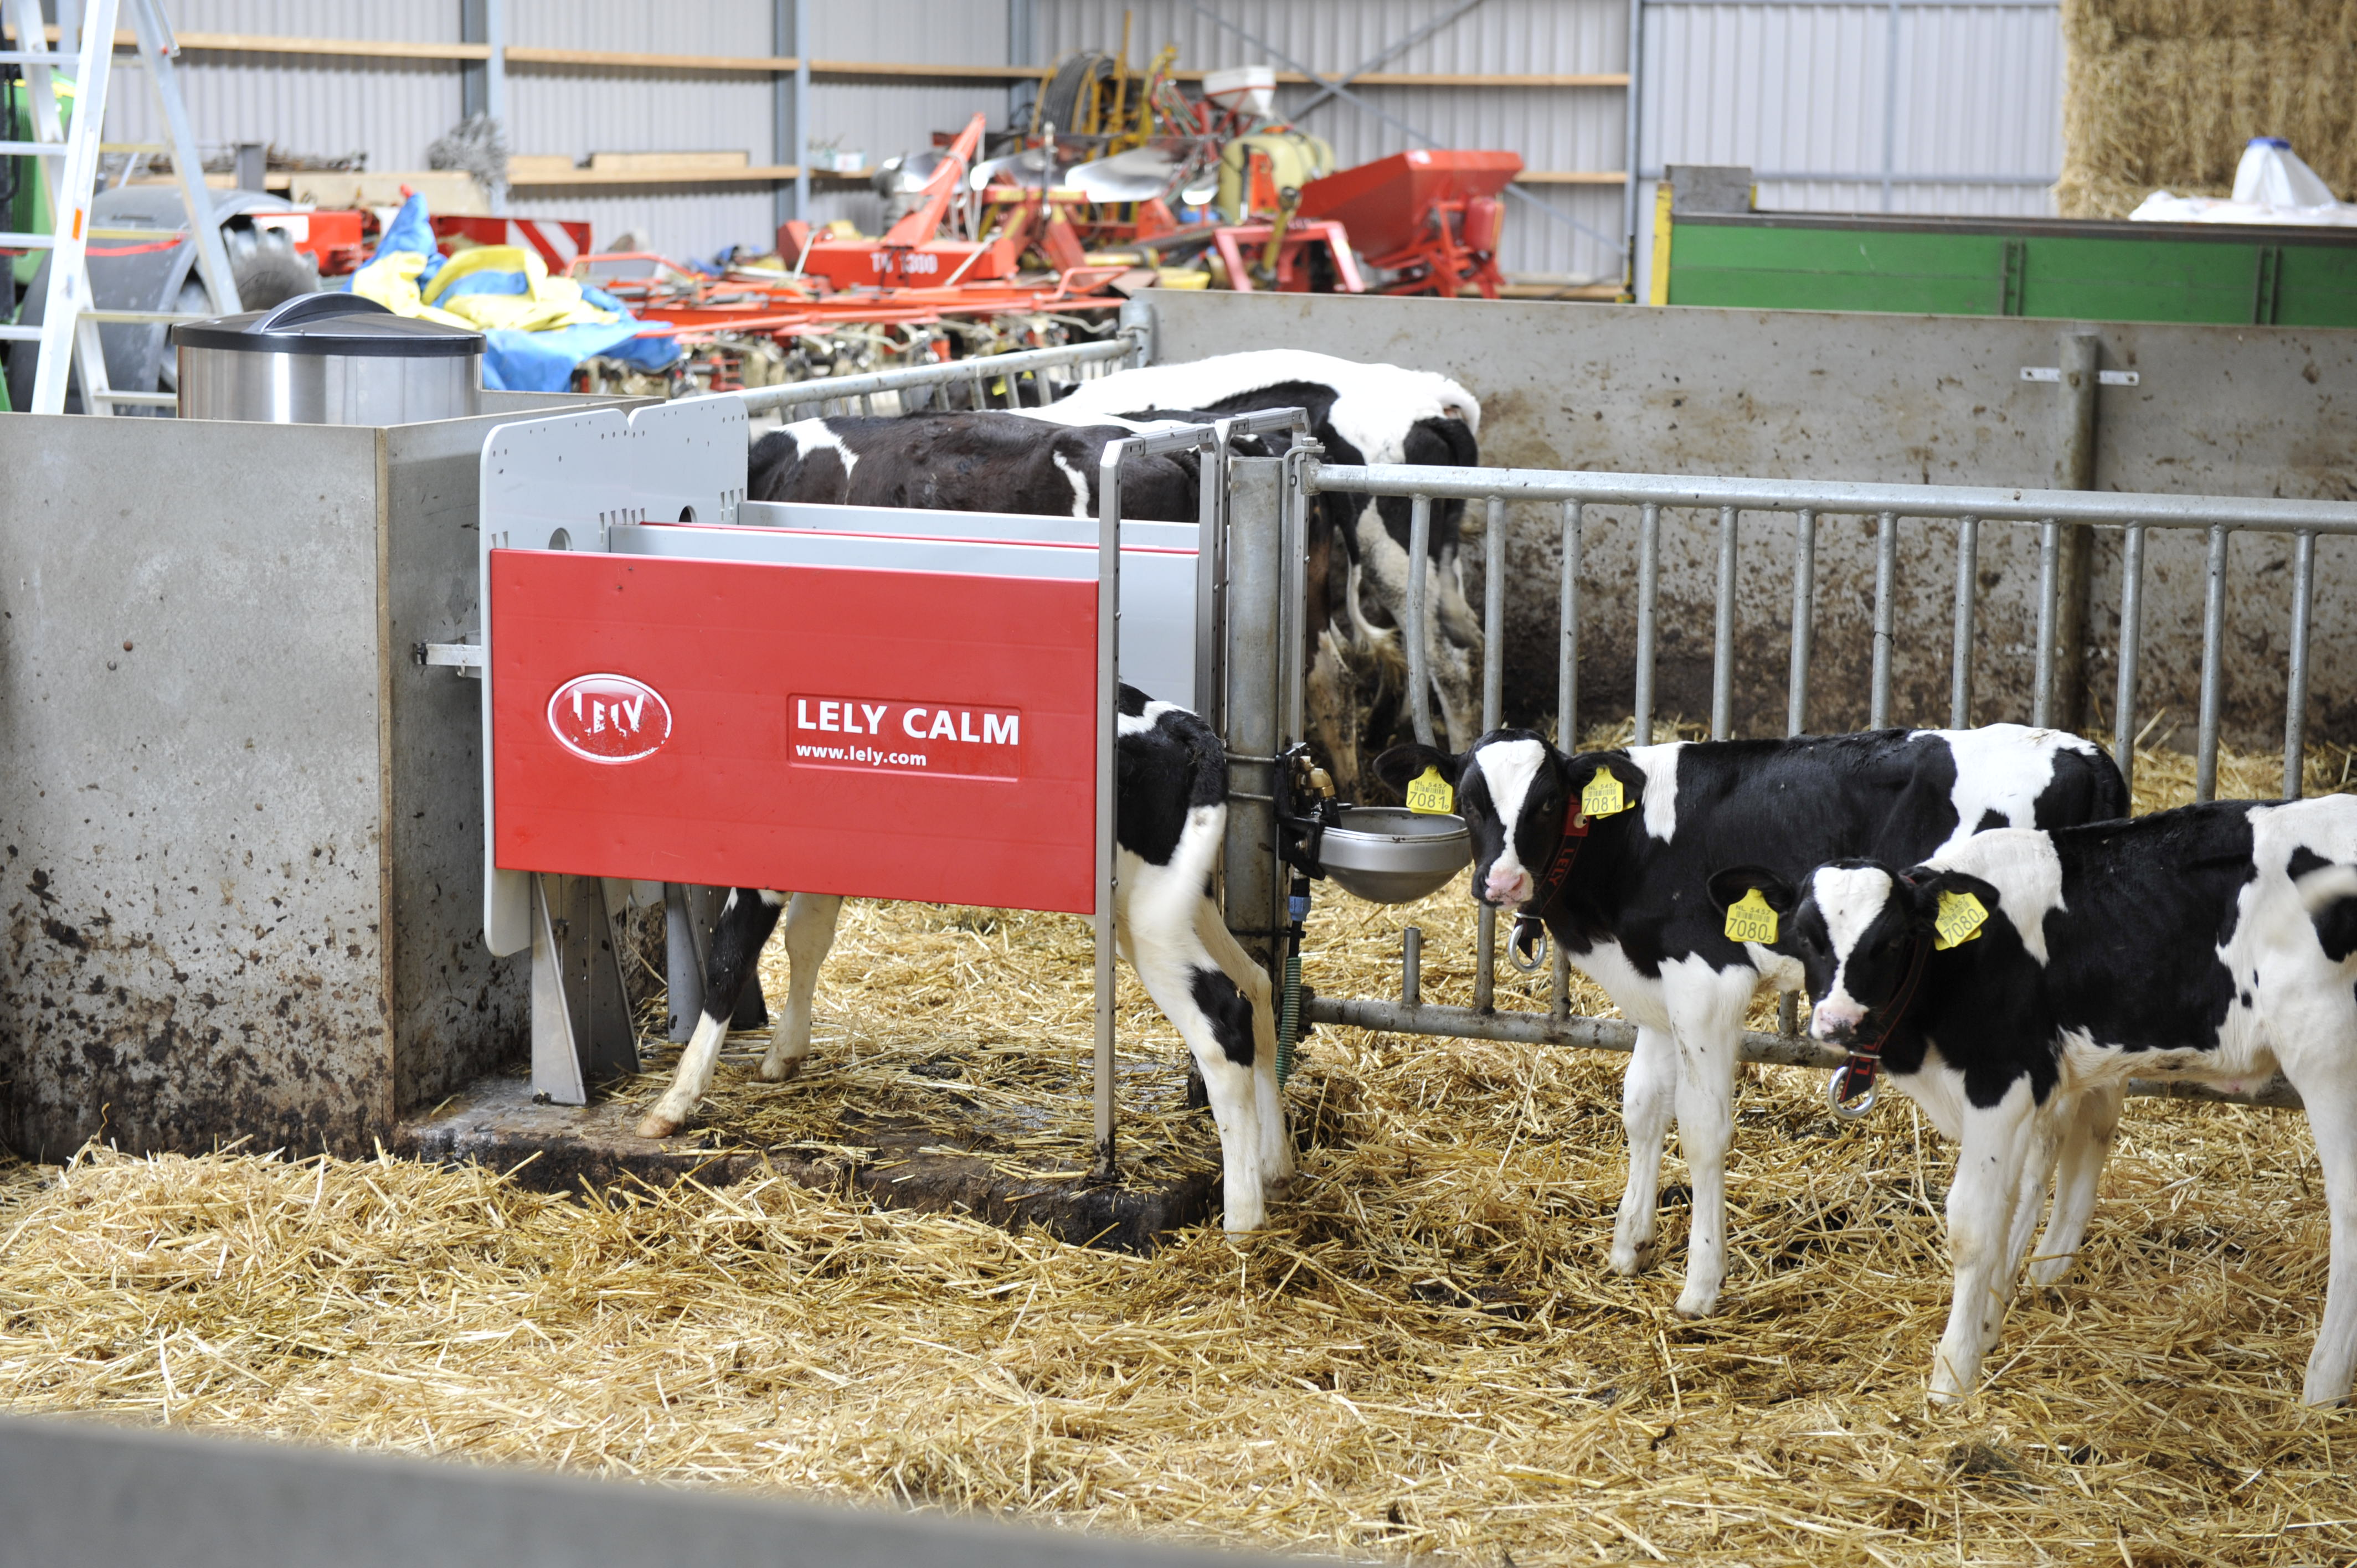 Lely Used - Show All Adds (82)